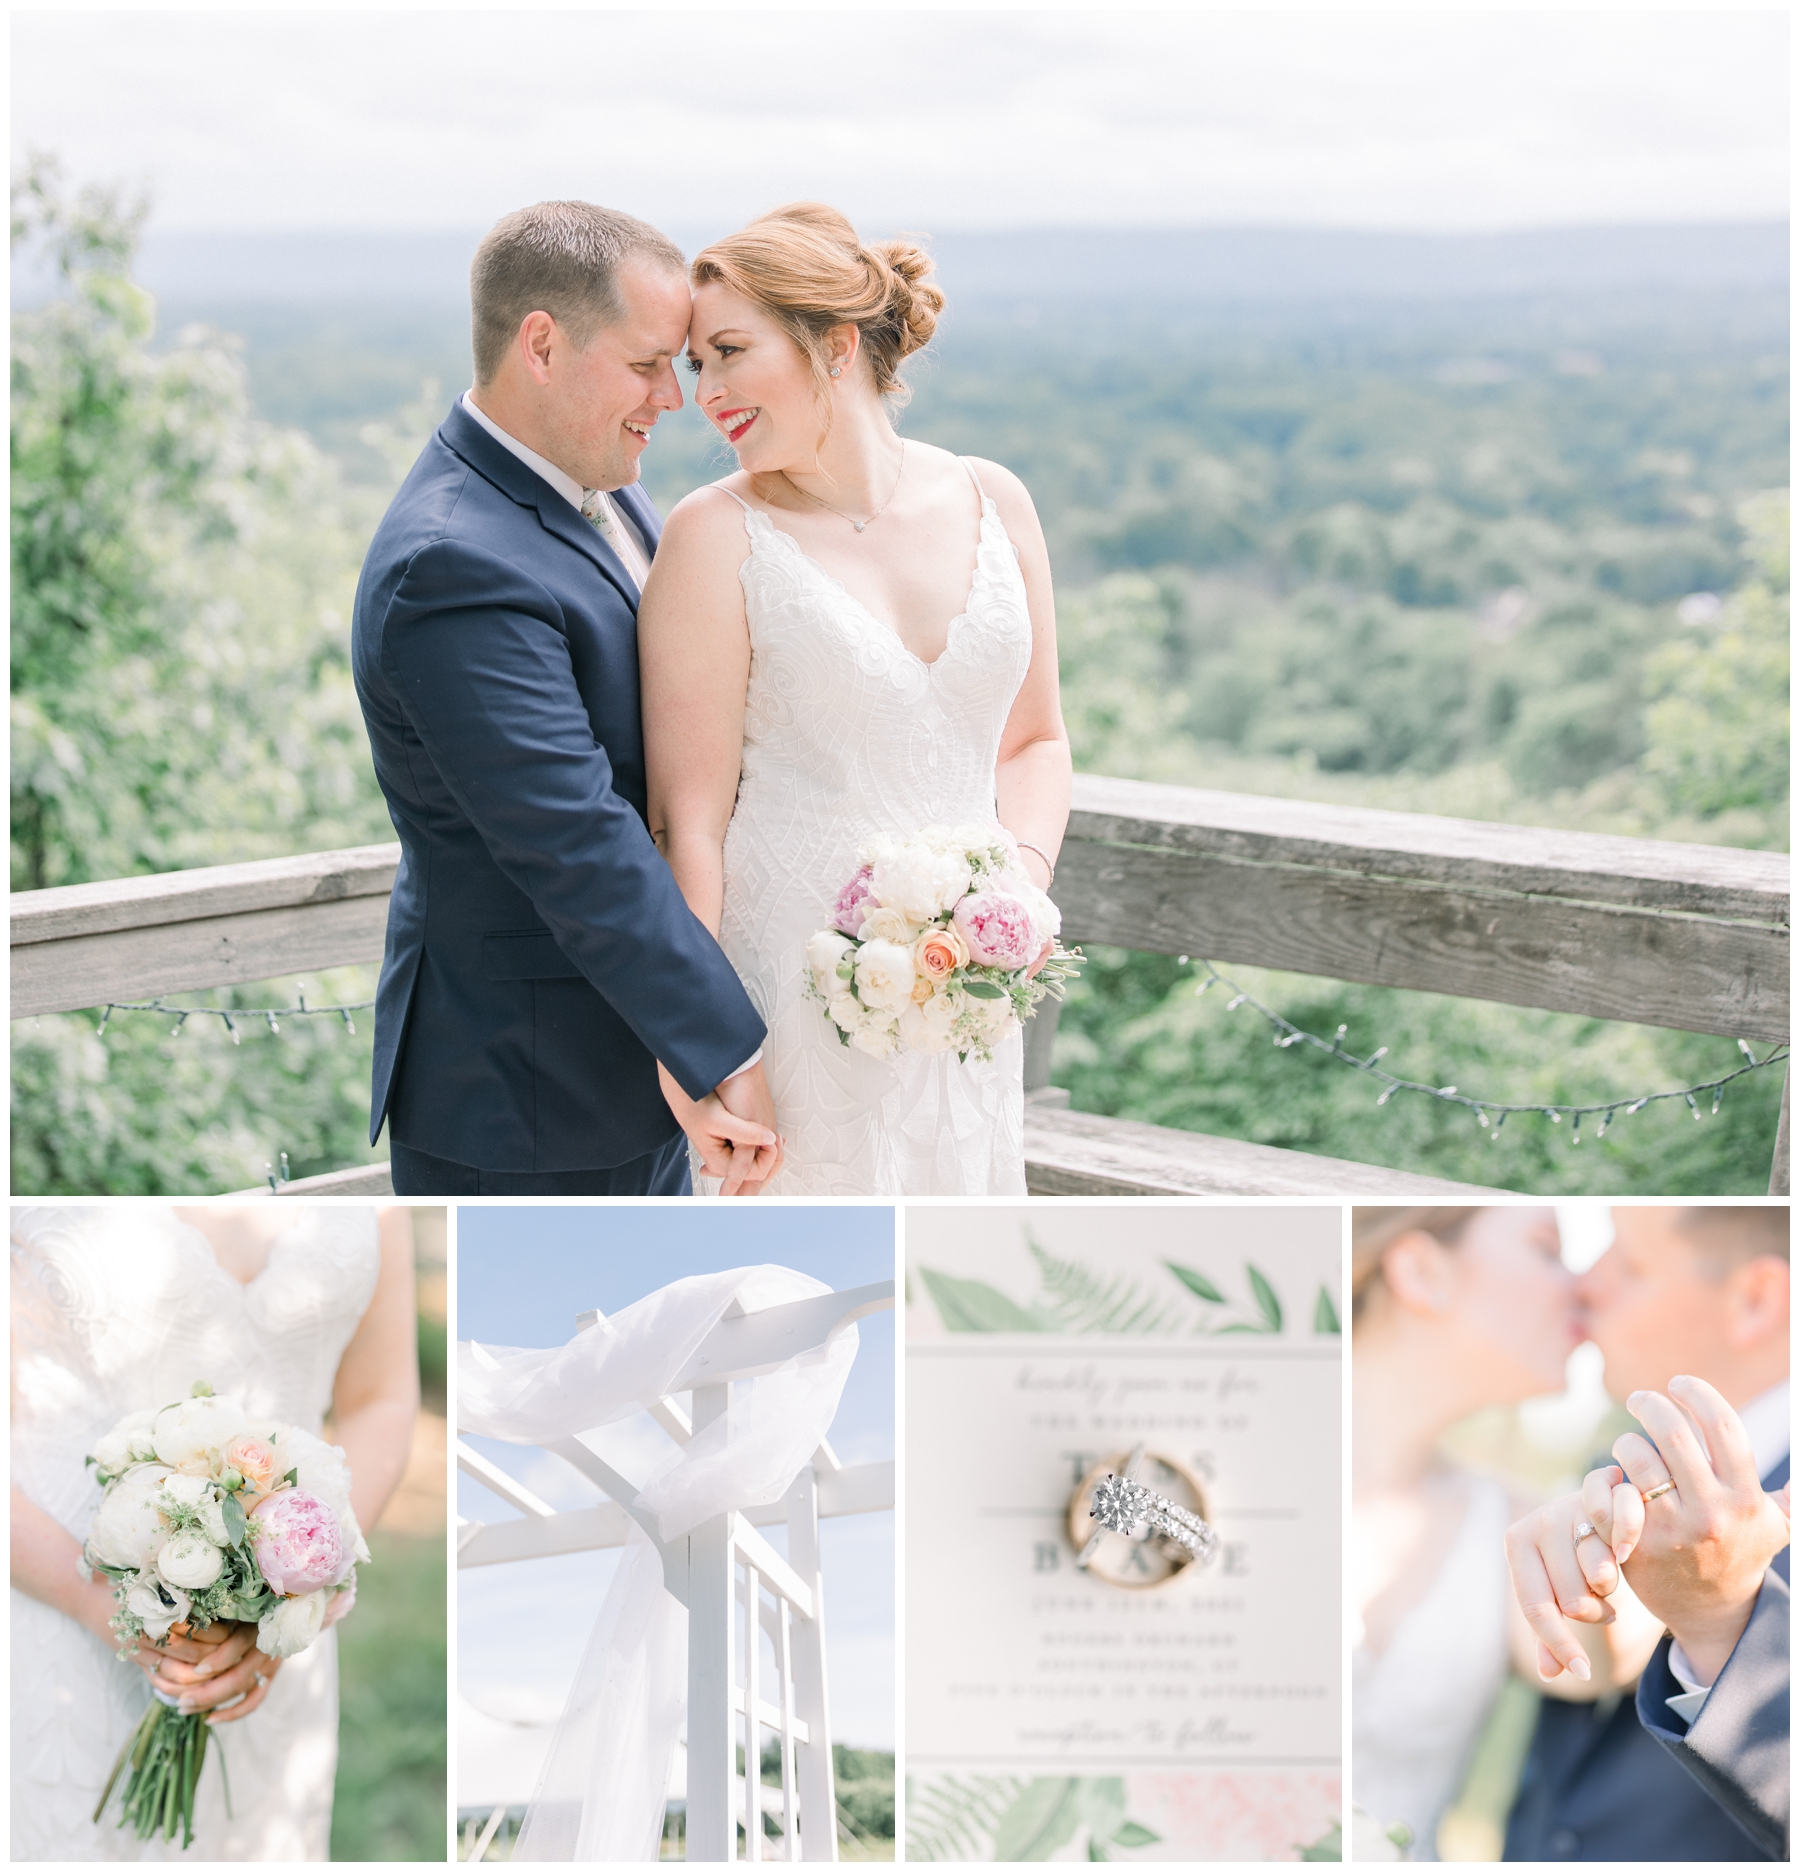 Rogers Orchards Connecticut Wedding by Stephanie Berenson Photography